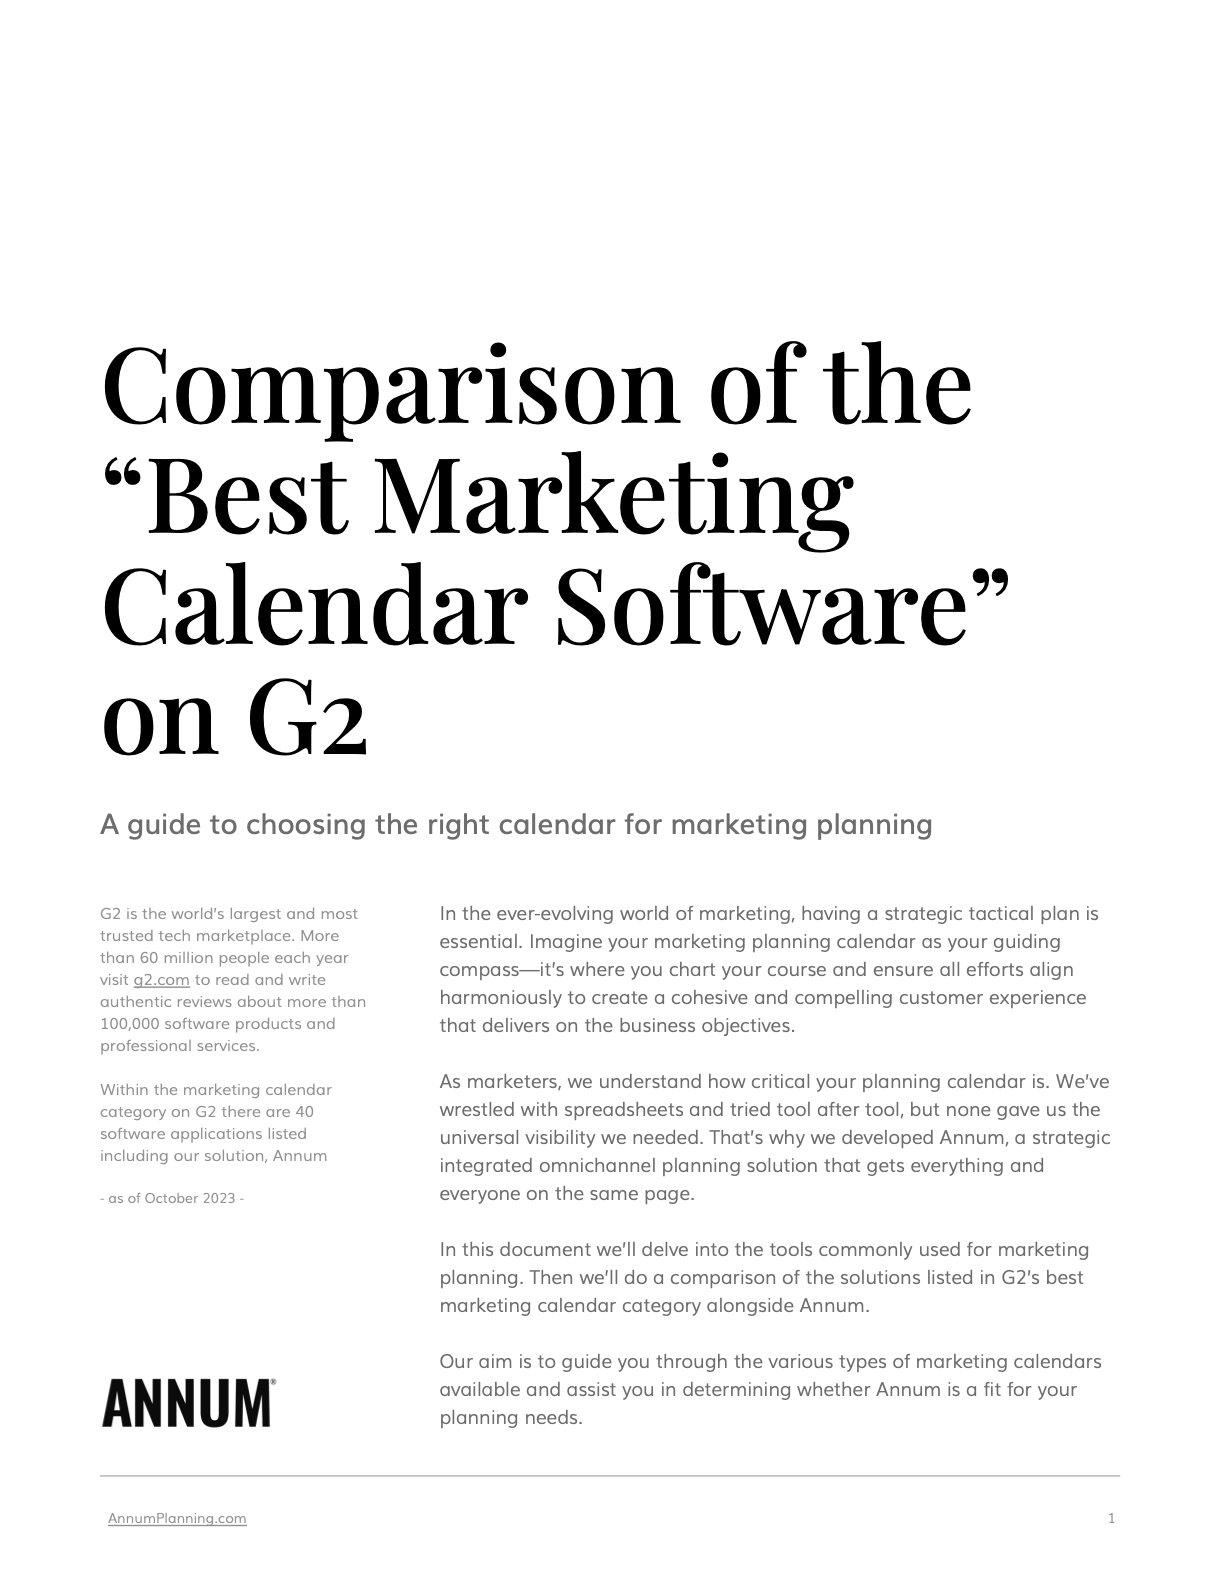 Comparison of G2's best marketing calendar software cover page